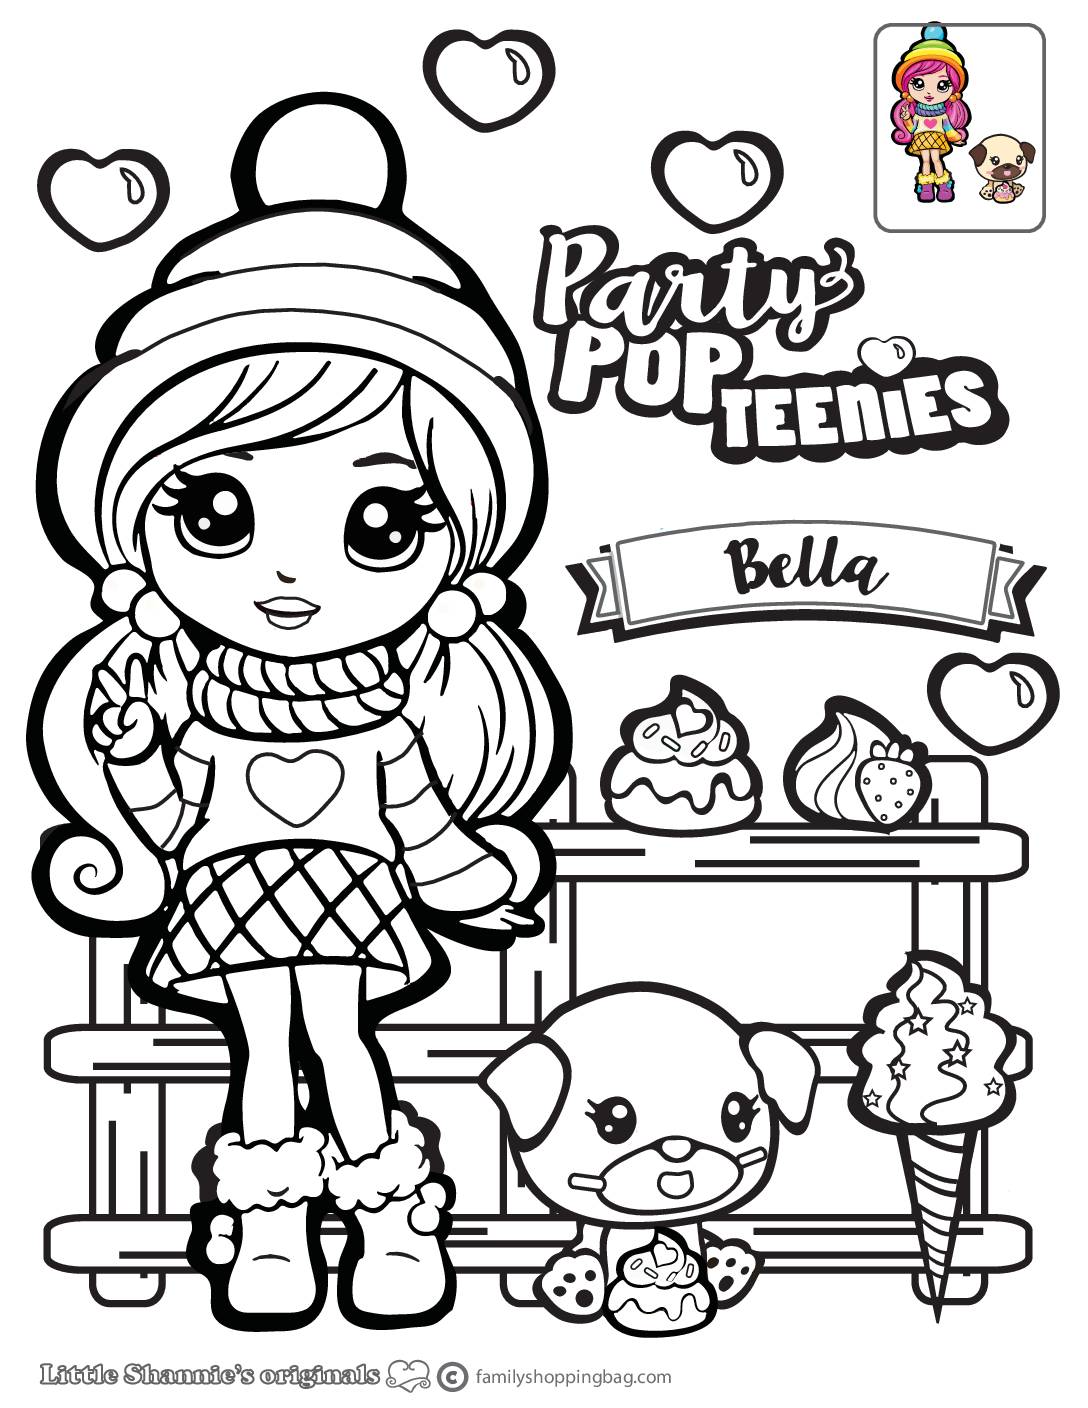 Bella Coloring Page Party Pop Teenies Coloring Pages